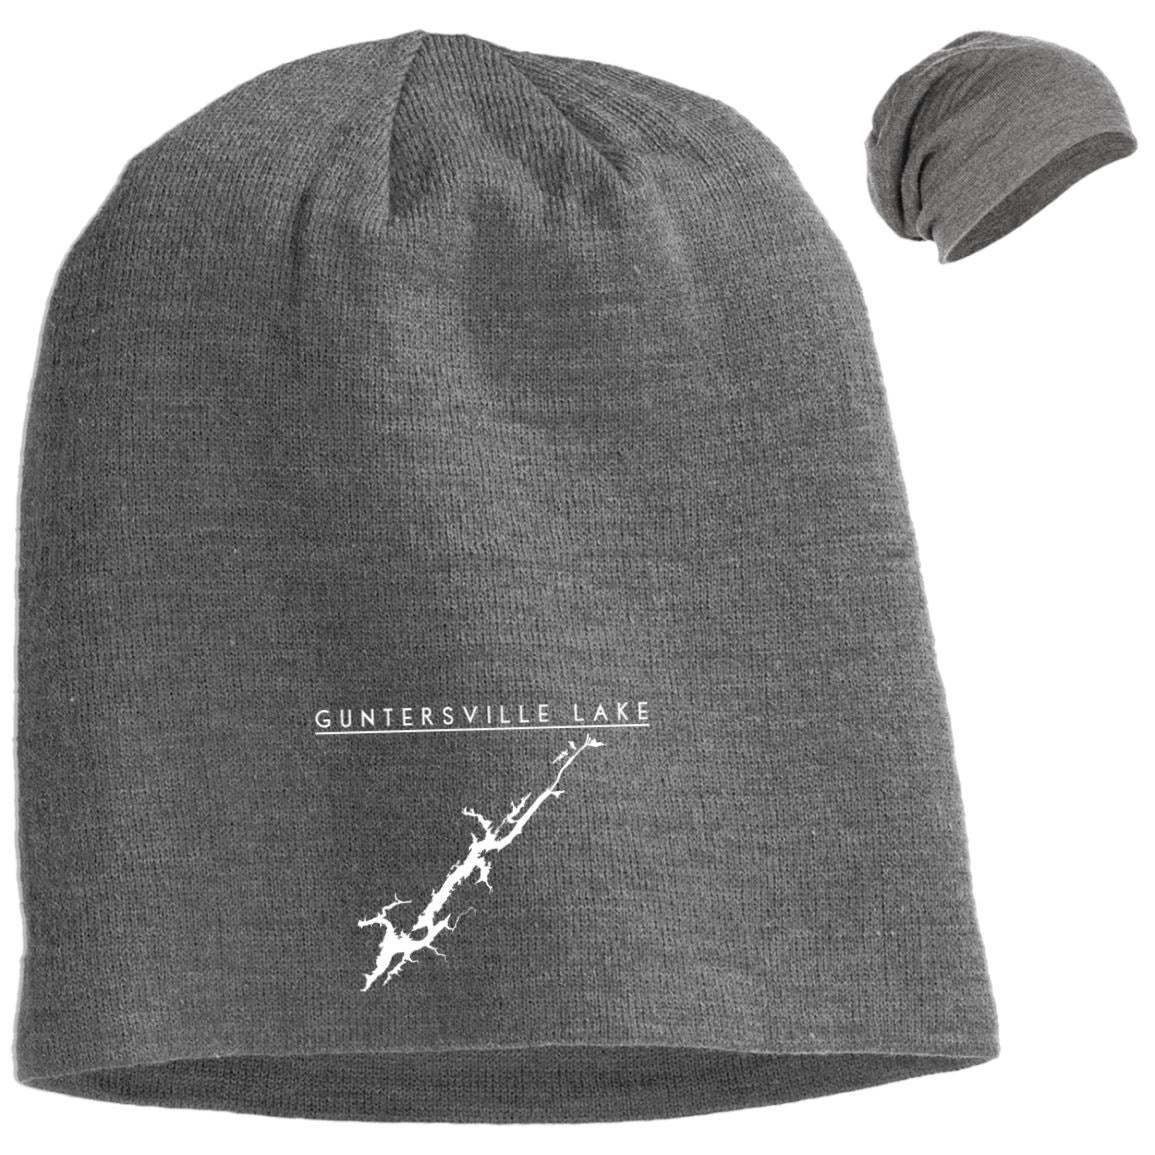 Guntersville Lake Embroidered Slouch Beanie - Houseboat Kings